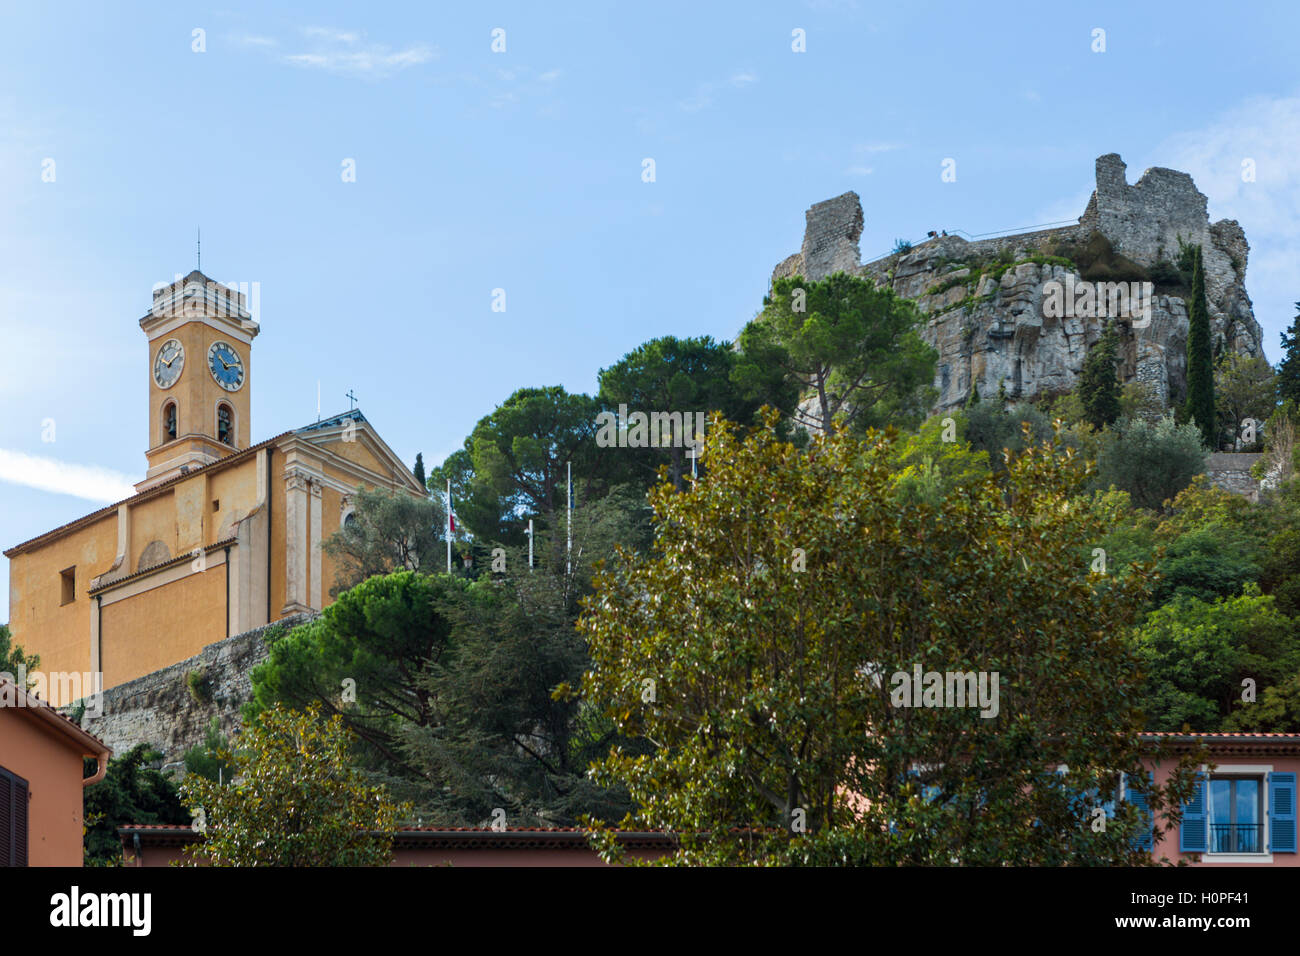 Low angle view of Eze, Provence, Alpes-Maritimes, France Banque D'Images